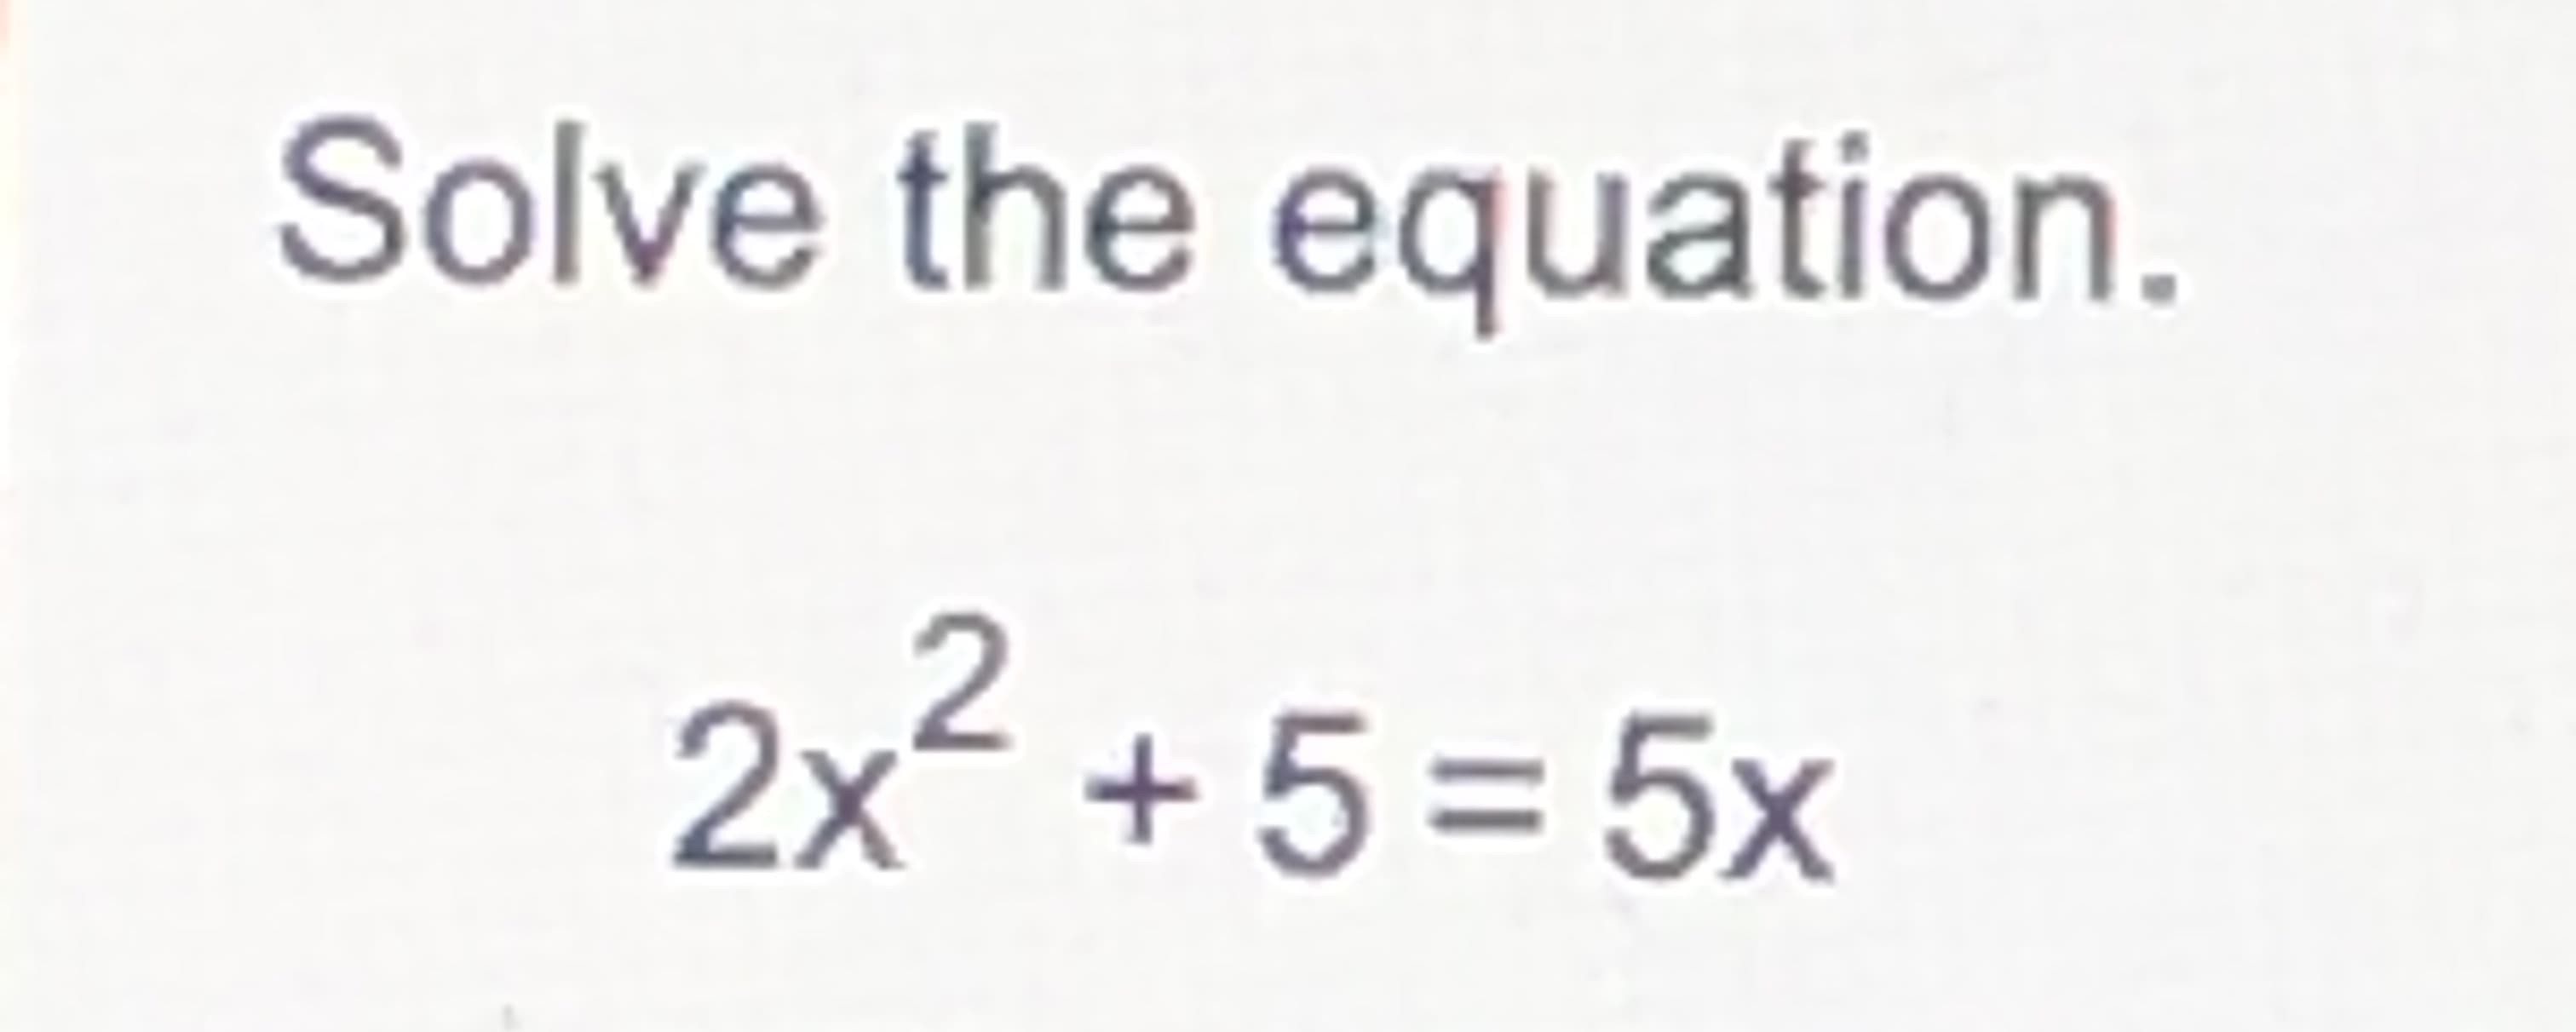 Solve the equation.
2x2 +5 = 5x
